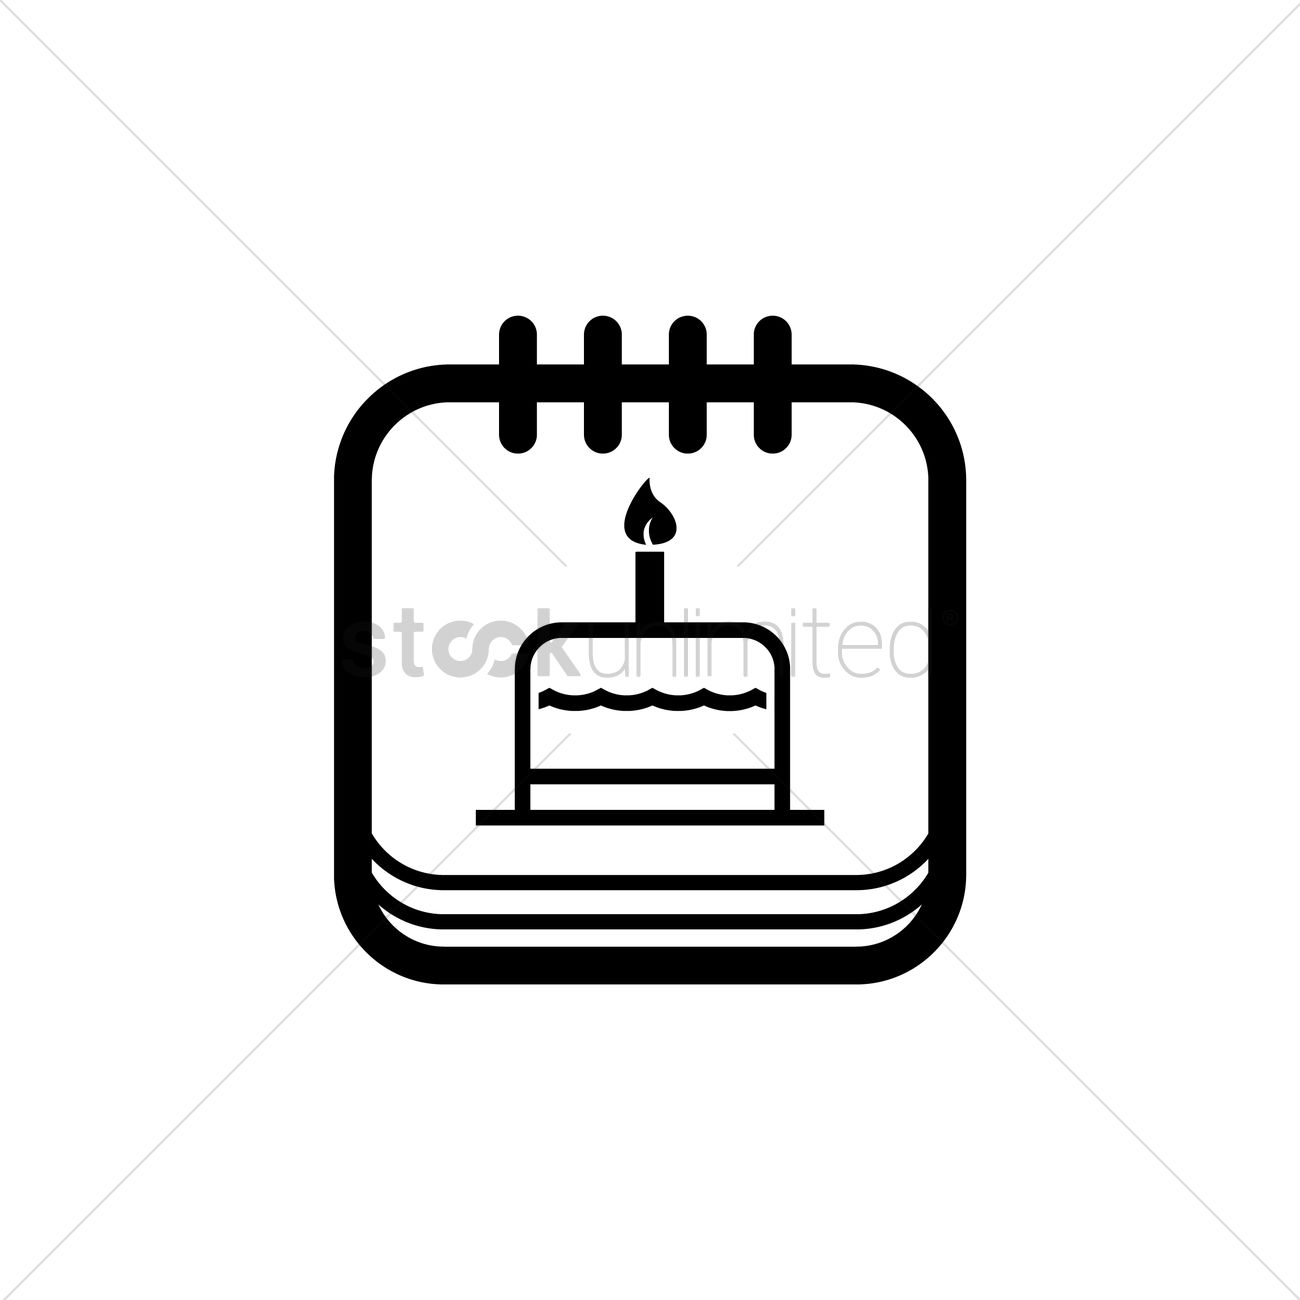 Date Of Birth Icon